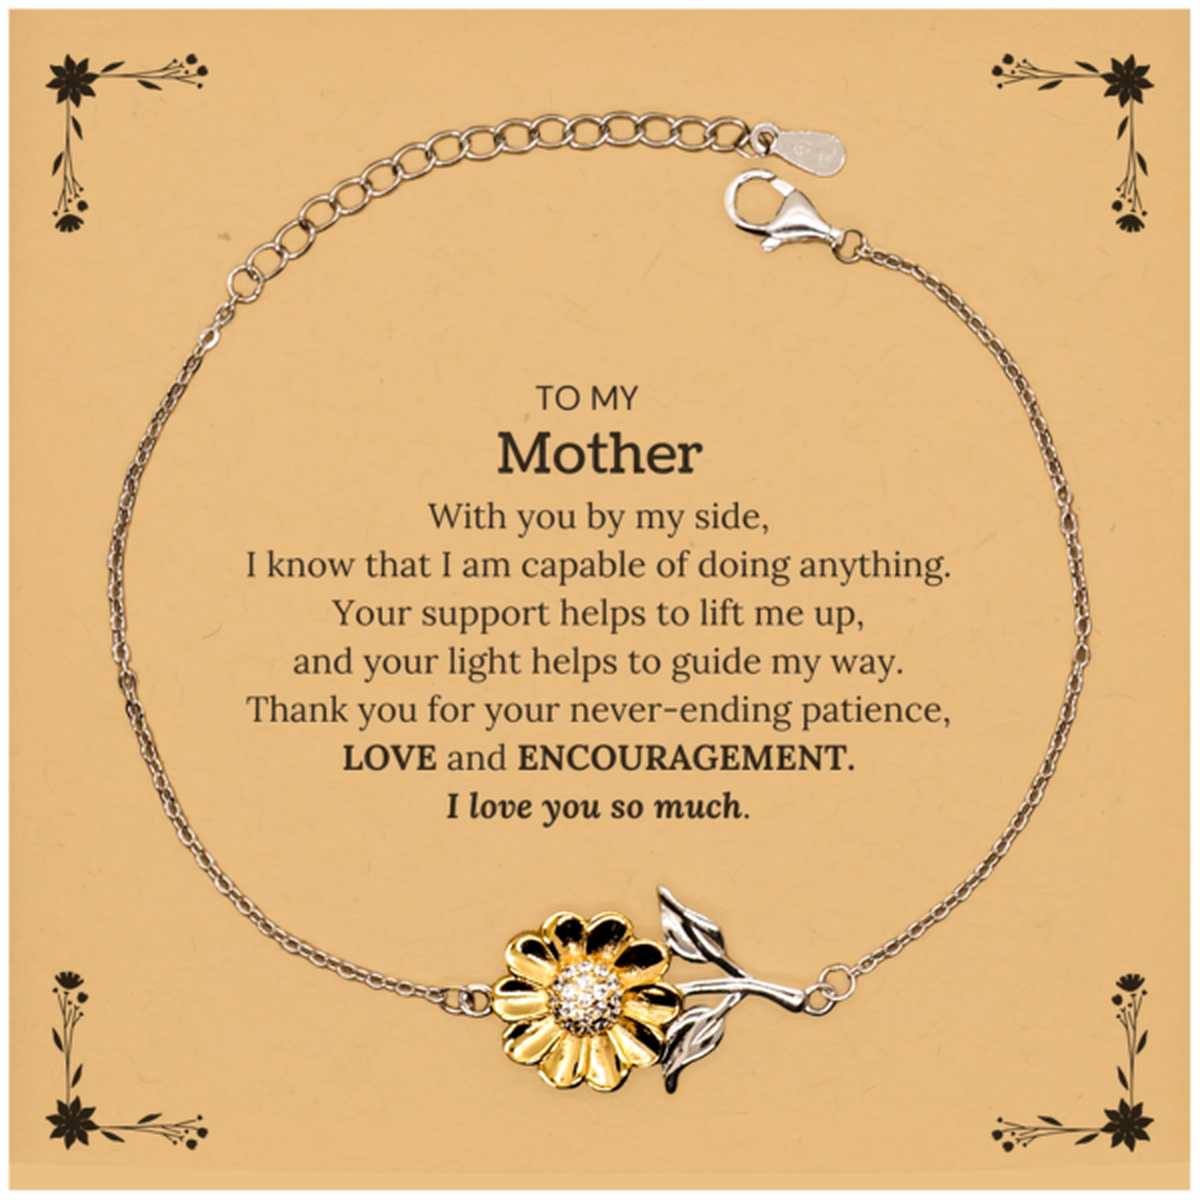 Appreciation Mother Sunflower Bracelet Gifts, To My Mother Birthday Christmas Wedding Keepsake Gifts for Mother With you by my side, I know that I am capable of doing anything. I love you so much